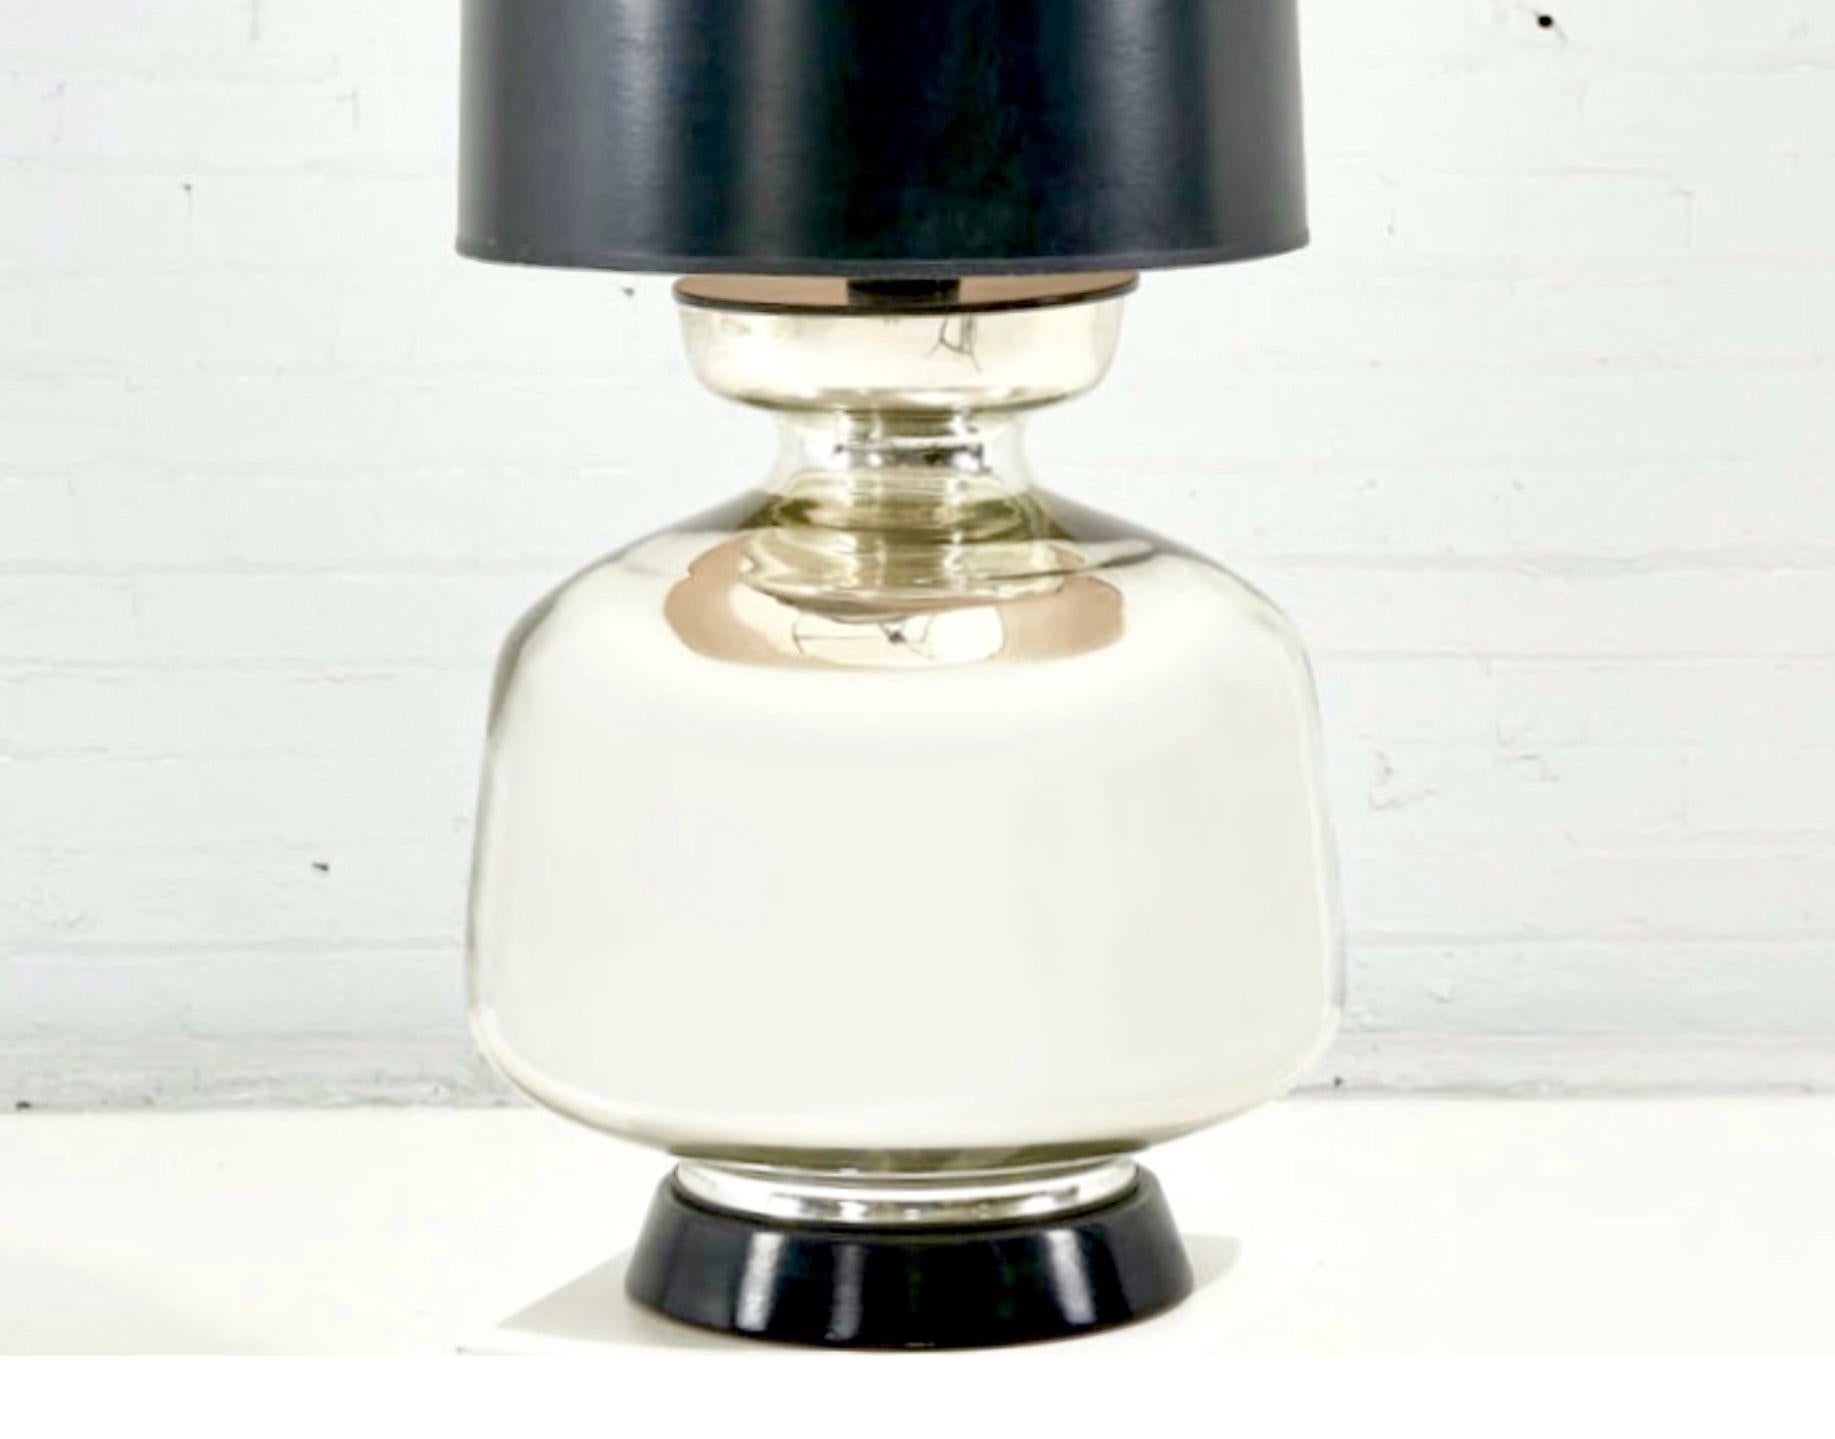 Mercury Glass Table Lamp, 1960
FREE SHIPPING ANYWHERE IN THE United States